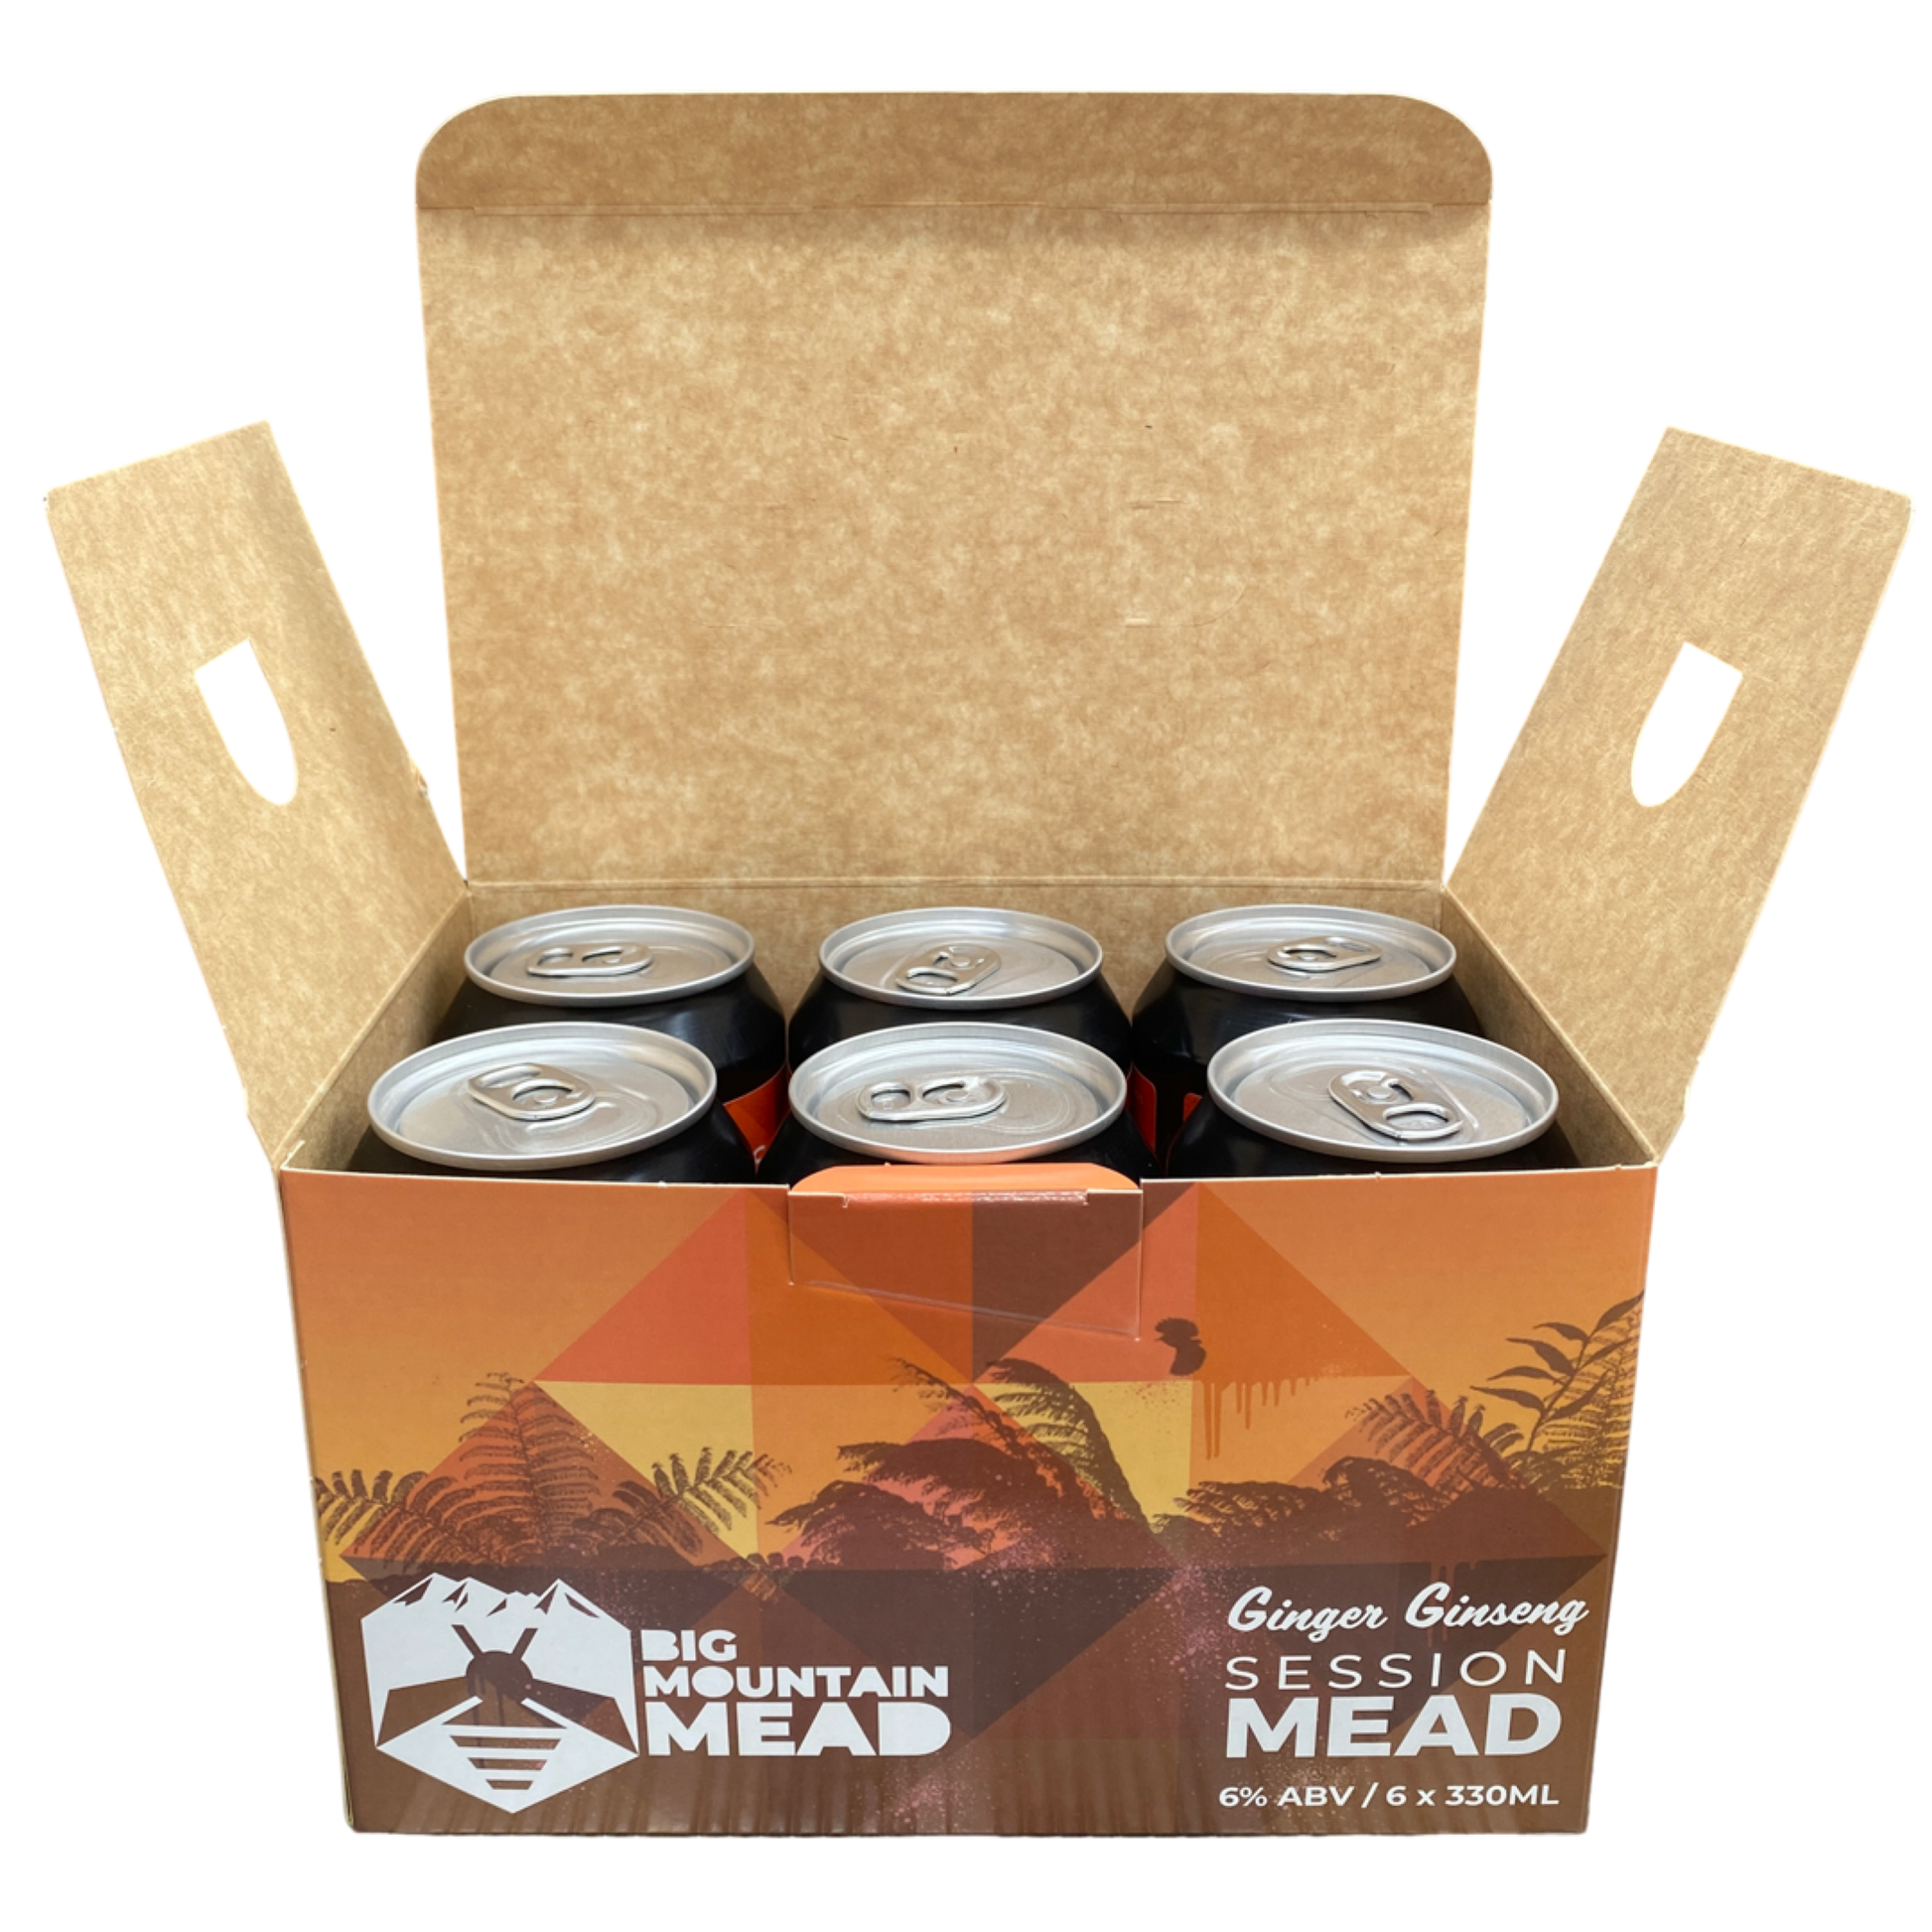 Ginger Ginseng Mead Retail 6-pack 330ml cans - Big Mountain Mead